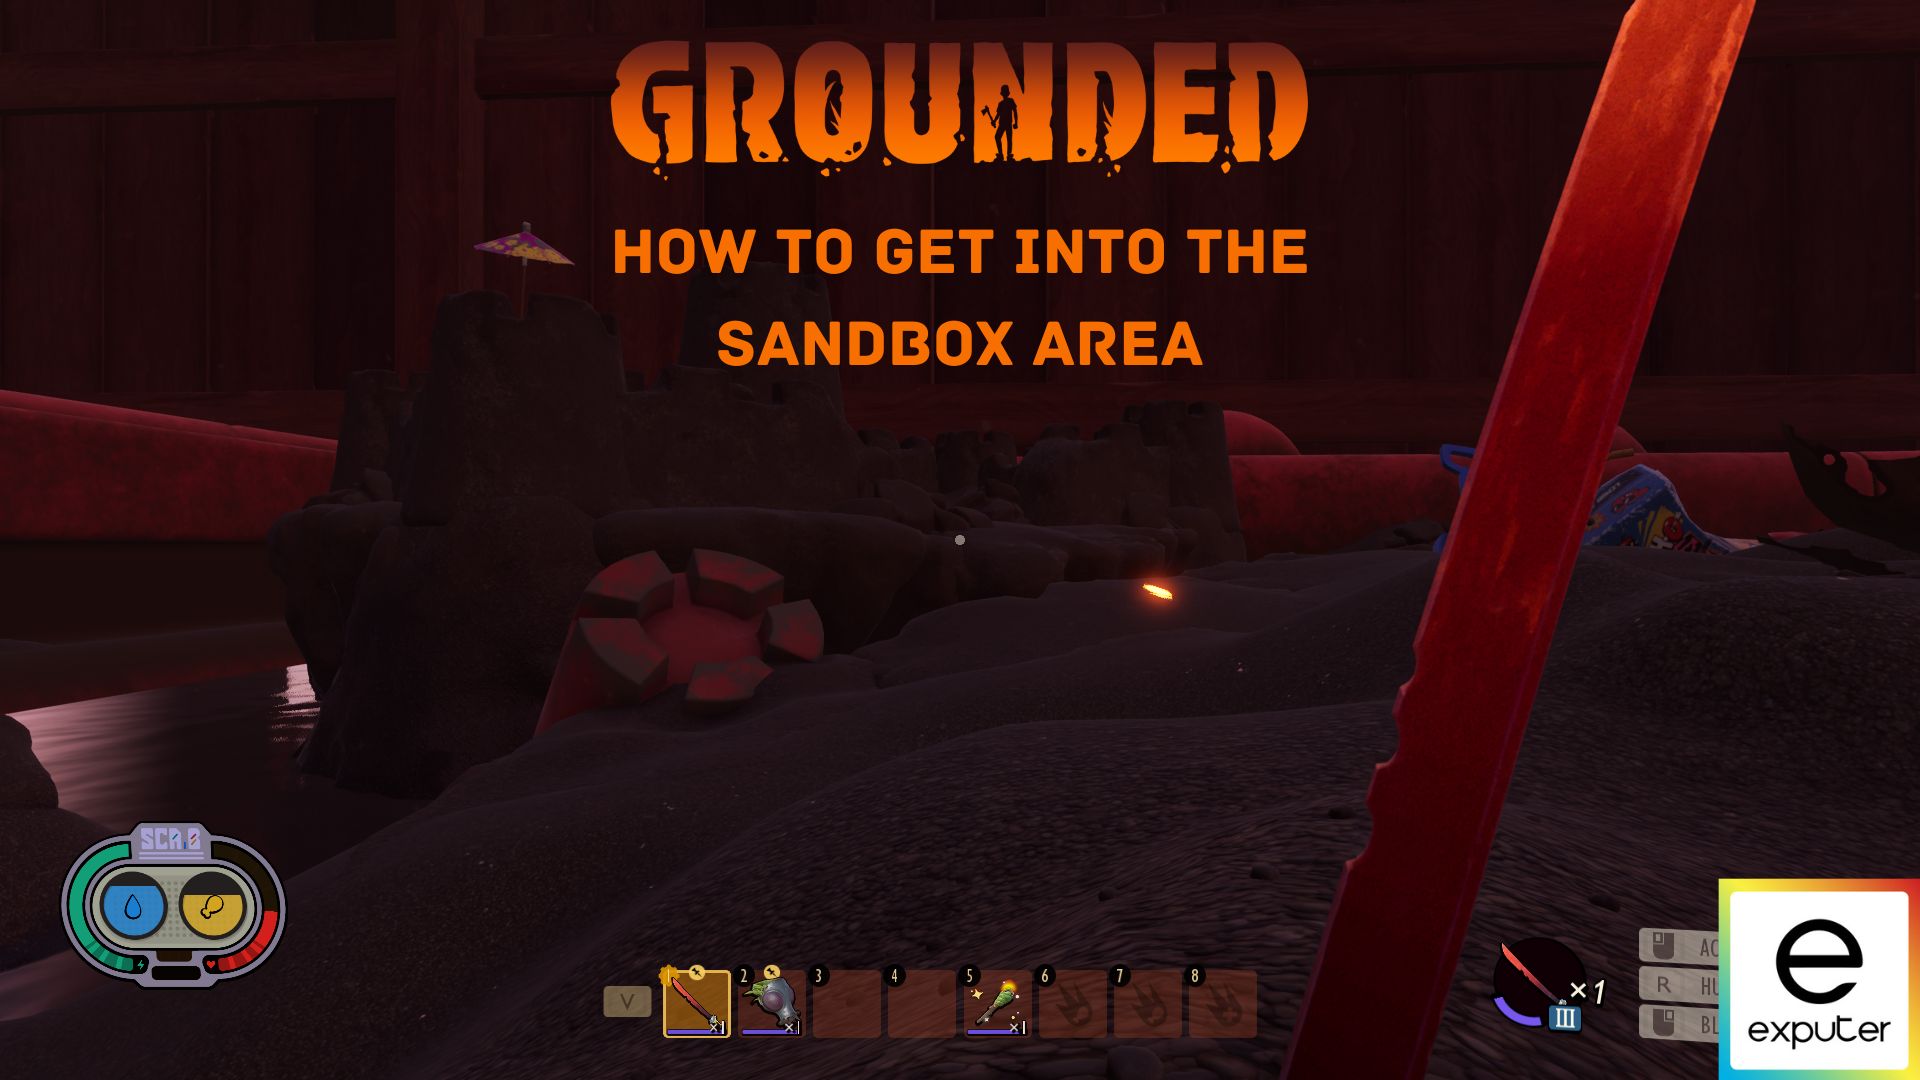 how to get into the sandbox in grounded